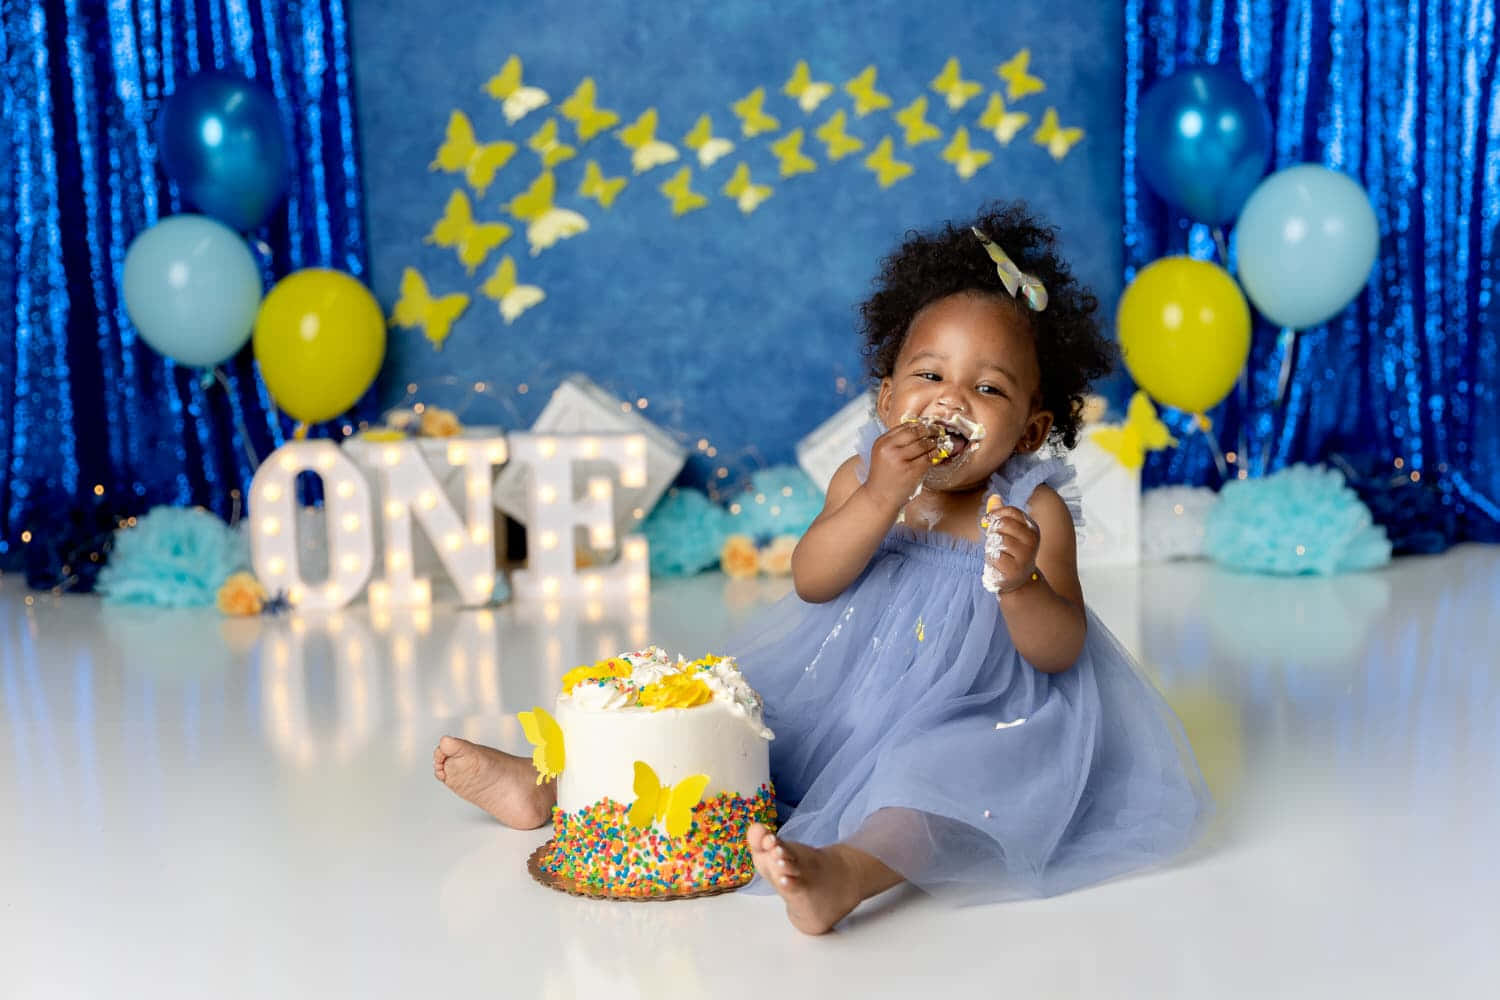 Cute Baby Girl Cake Smash Picture